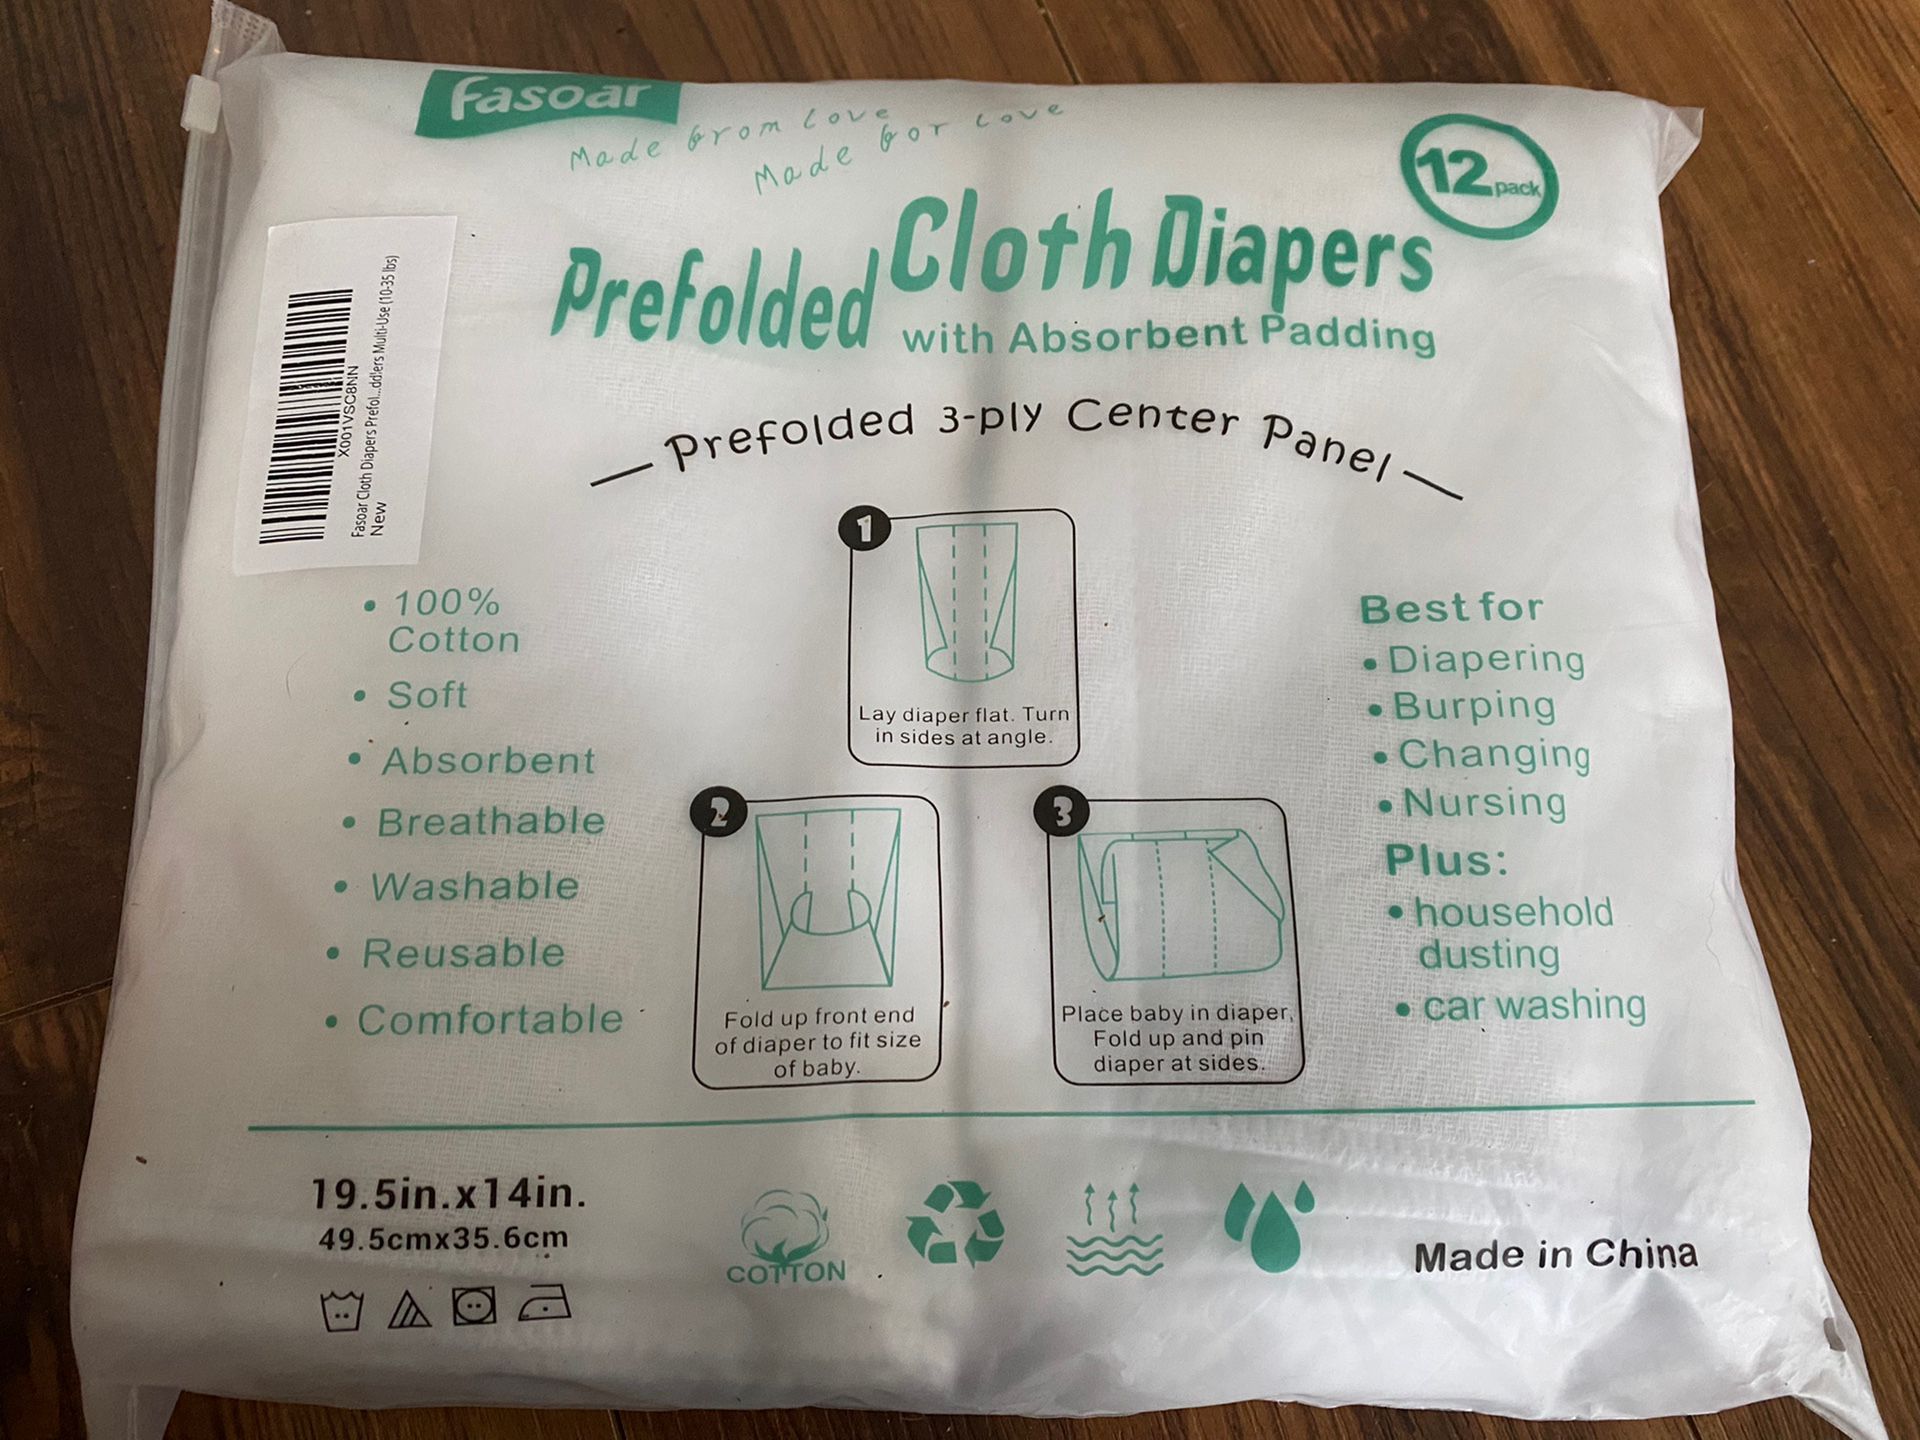 Prefolded Cloth Diapers